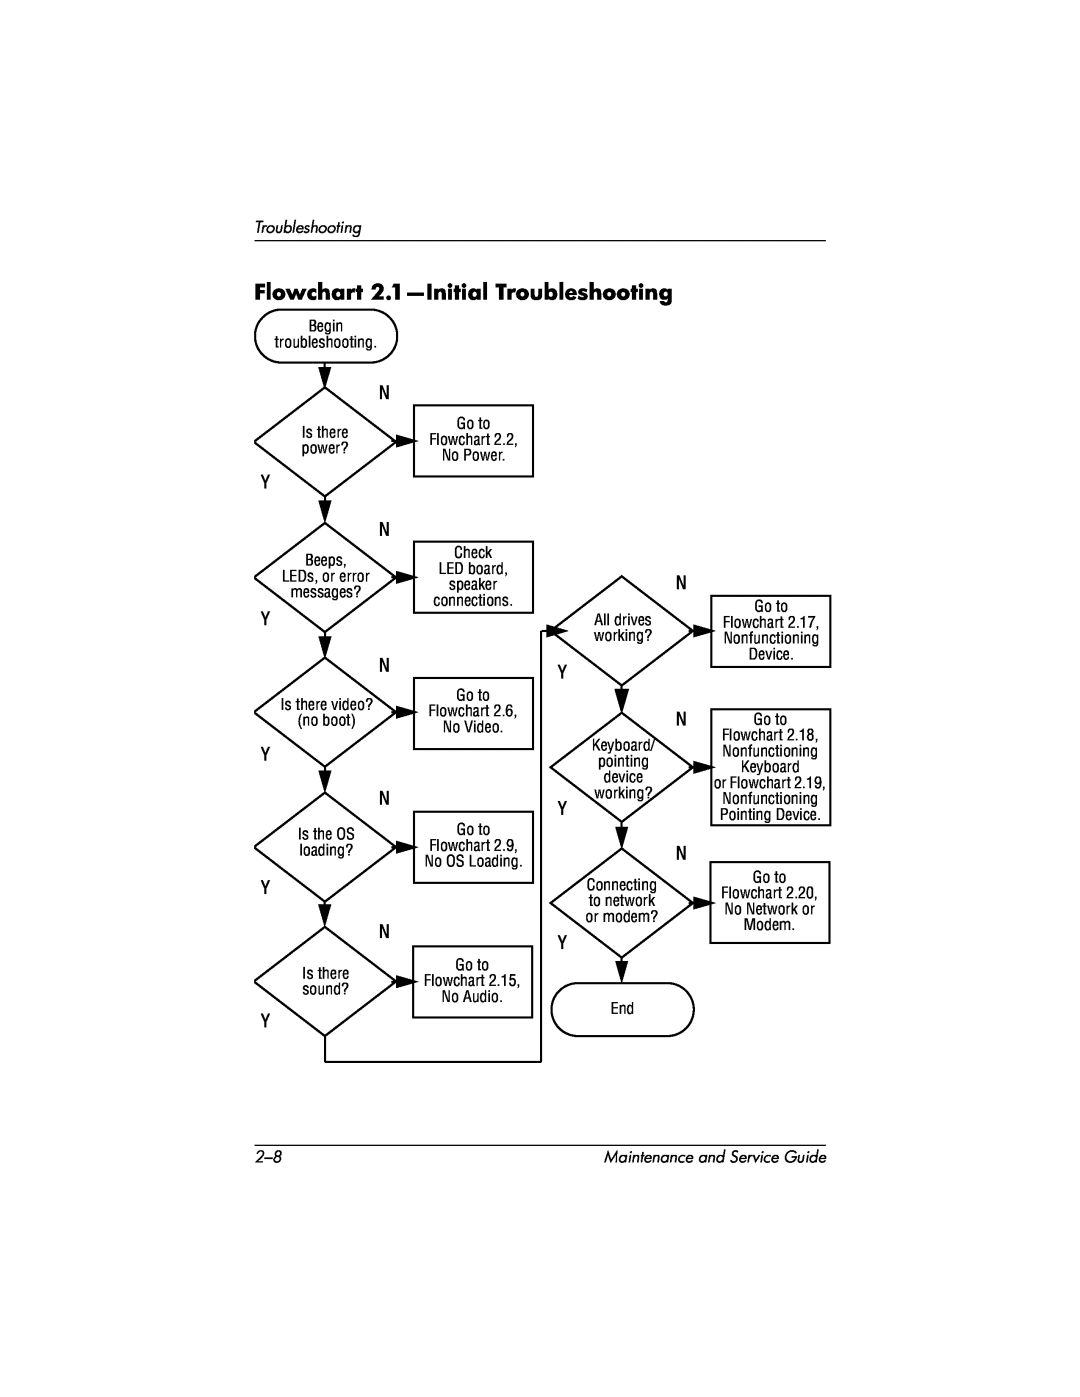 HP X1202AP, X1027AP, X1026AP, X1023AP, X1020EA, X1018CL manual Flowchart 2.1-Initial Troubleshooting, Go to Flowchart No Power 